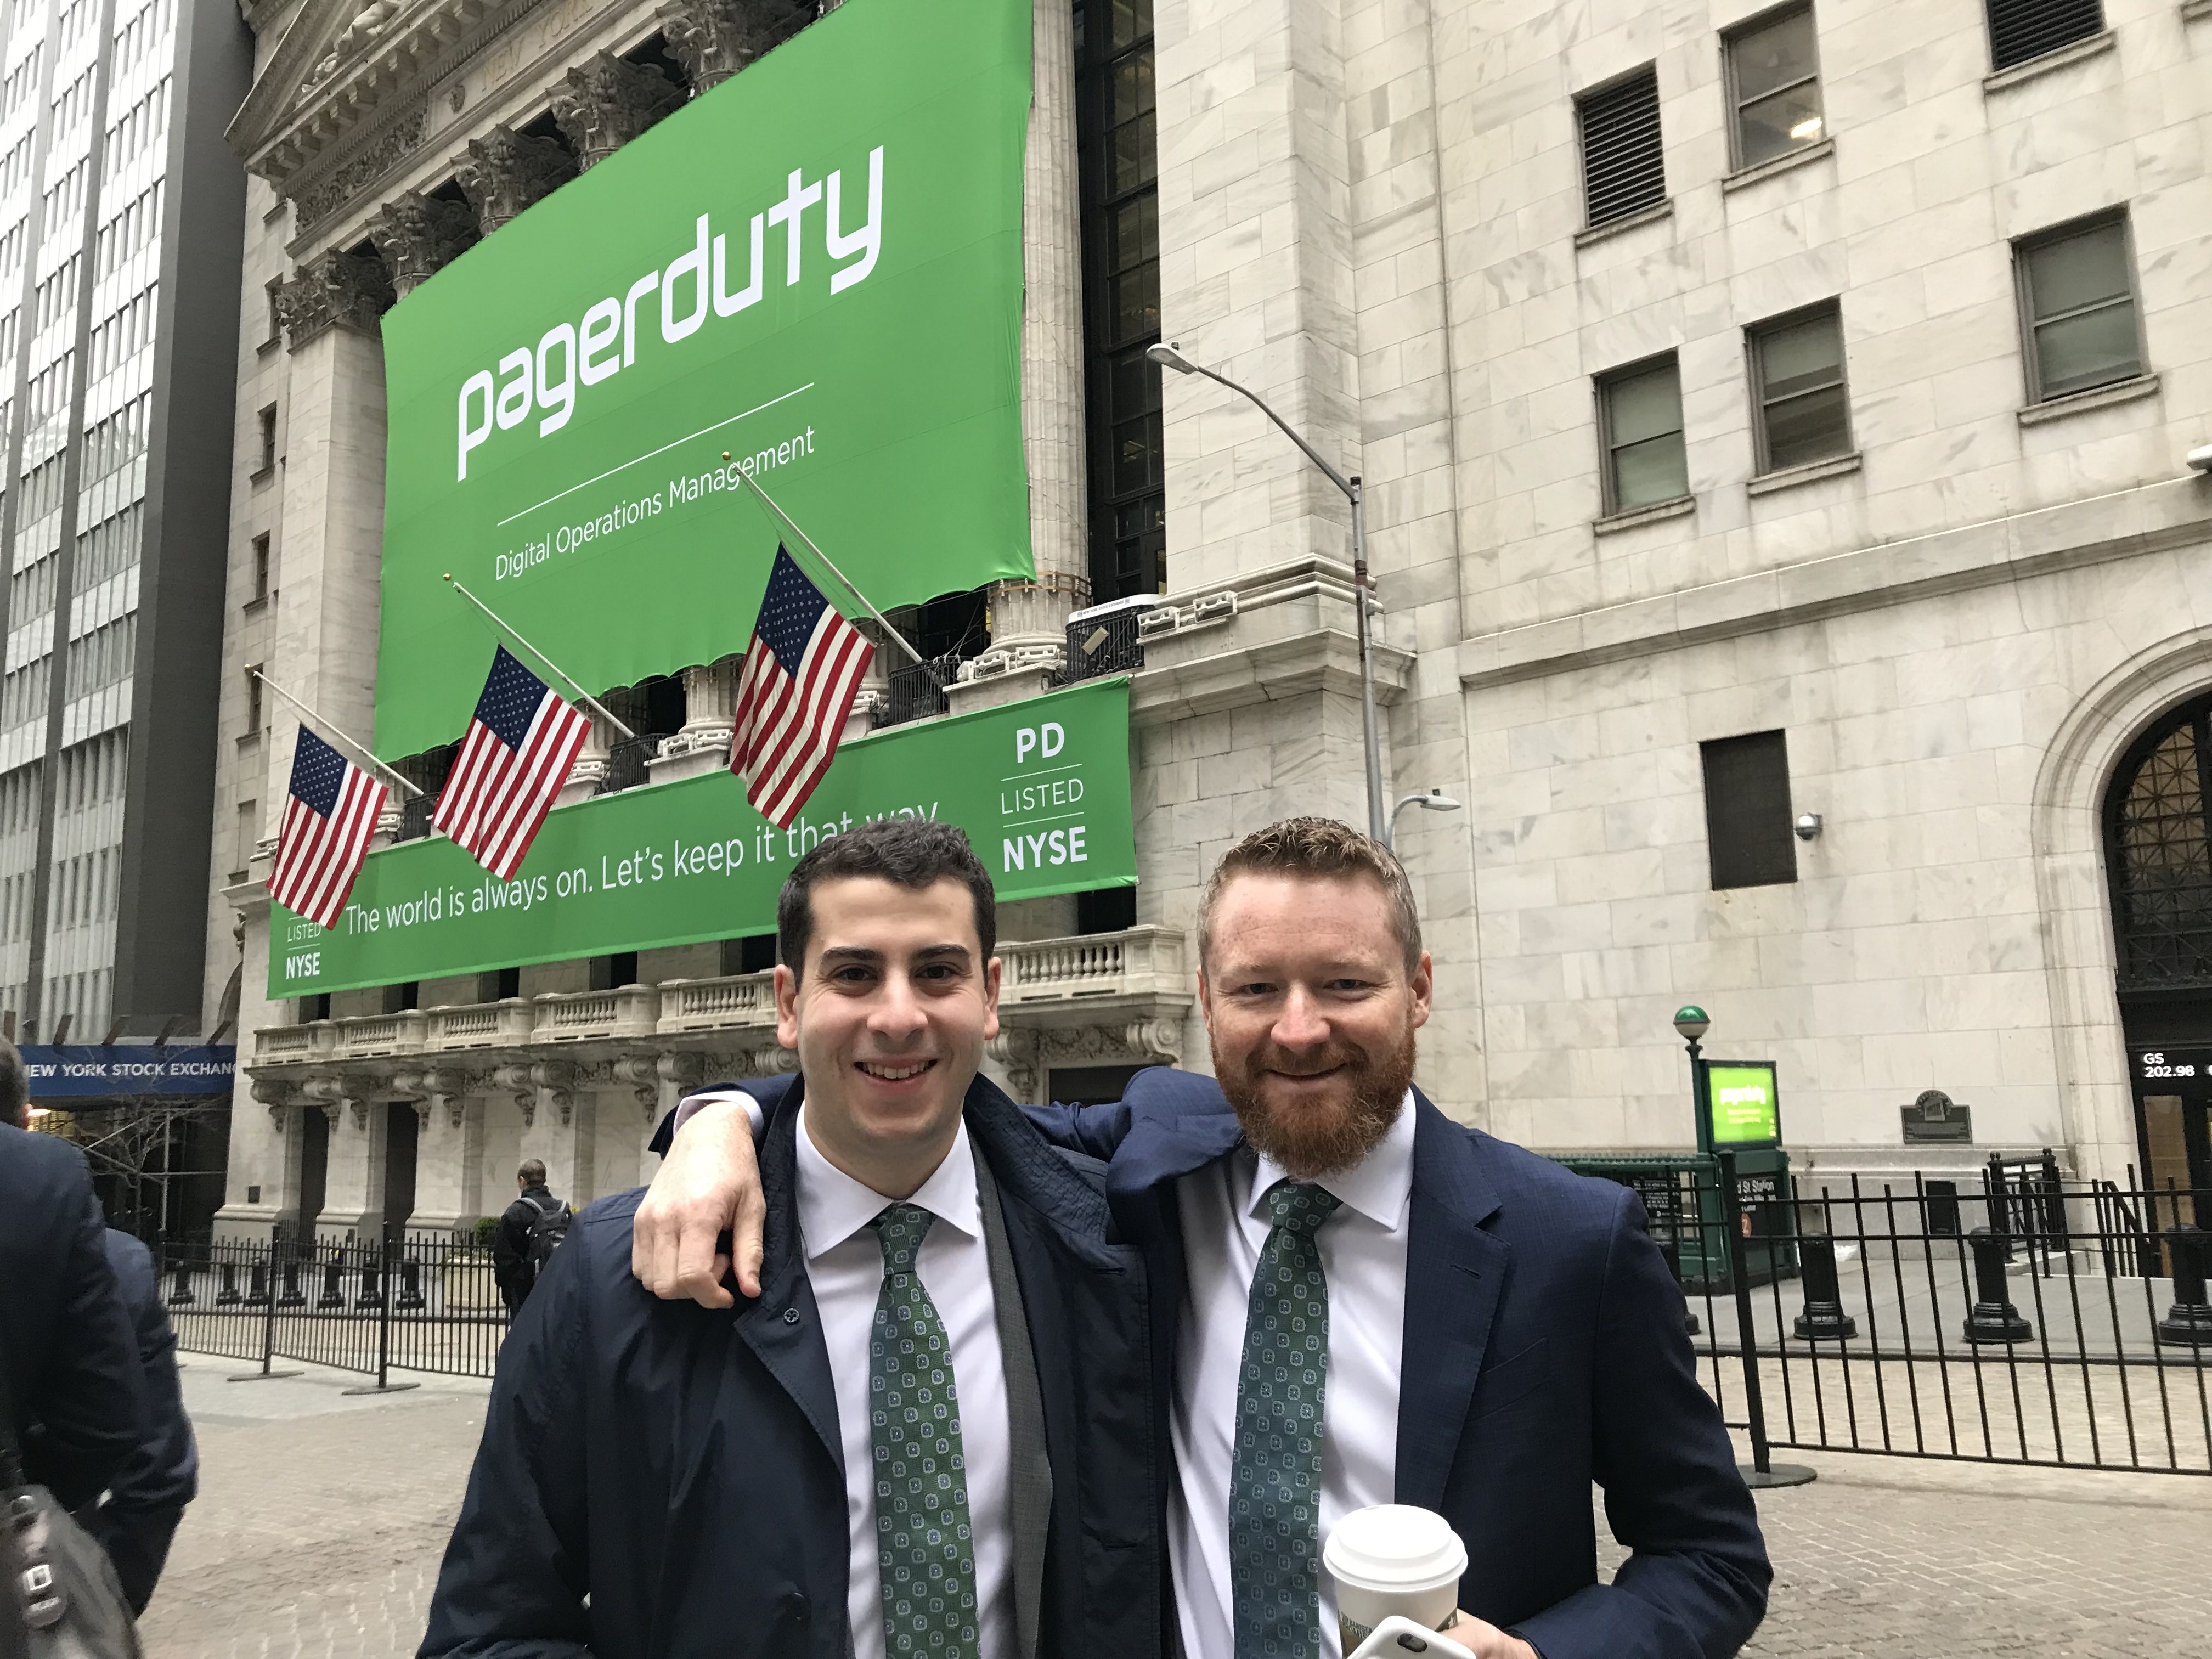 David (right) and I (left) on April 11th, 2019 at the PagerDuty IPO. Yes we had matching ties 😂